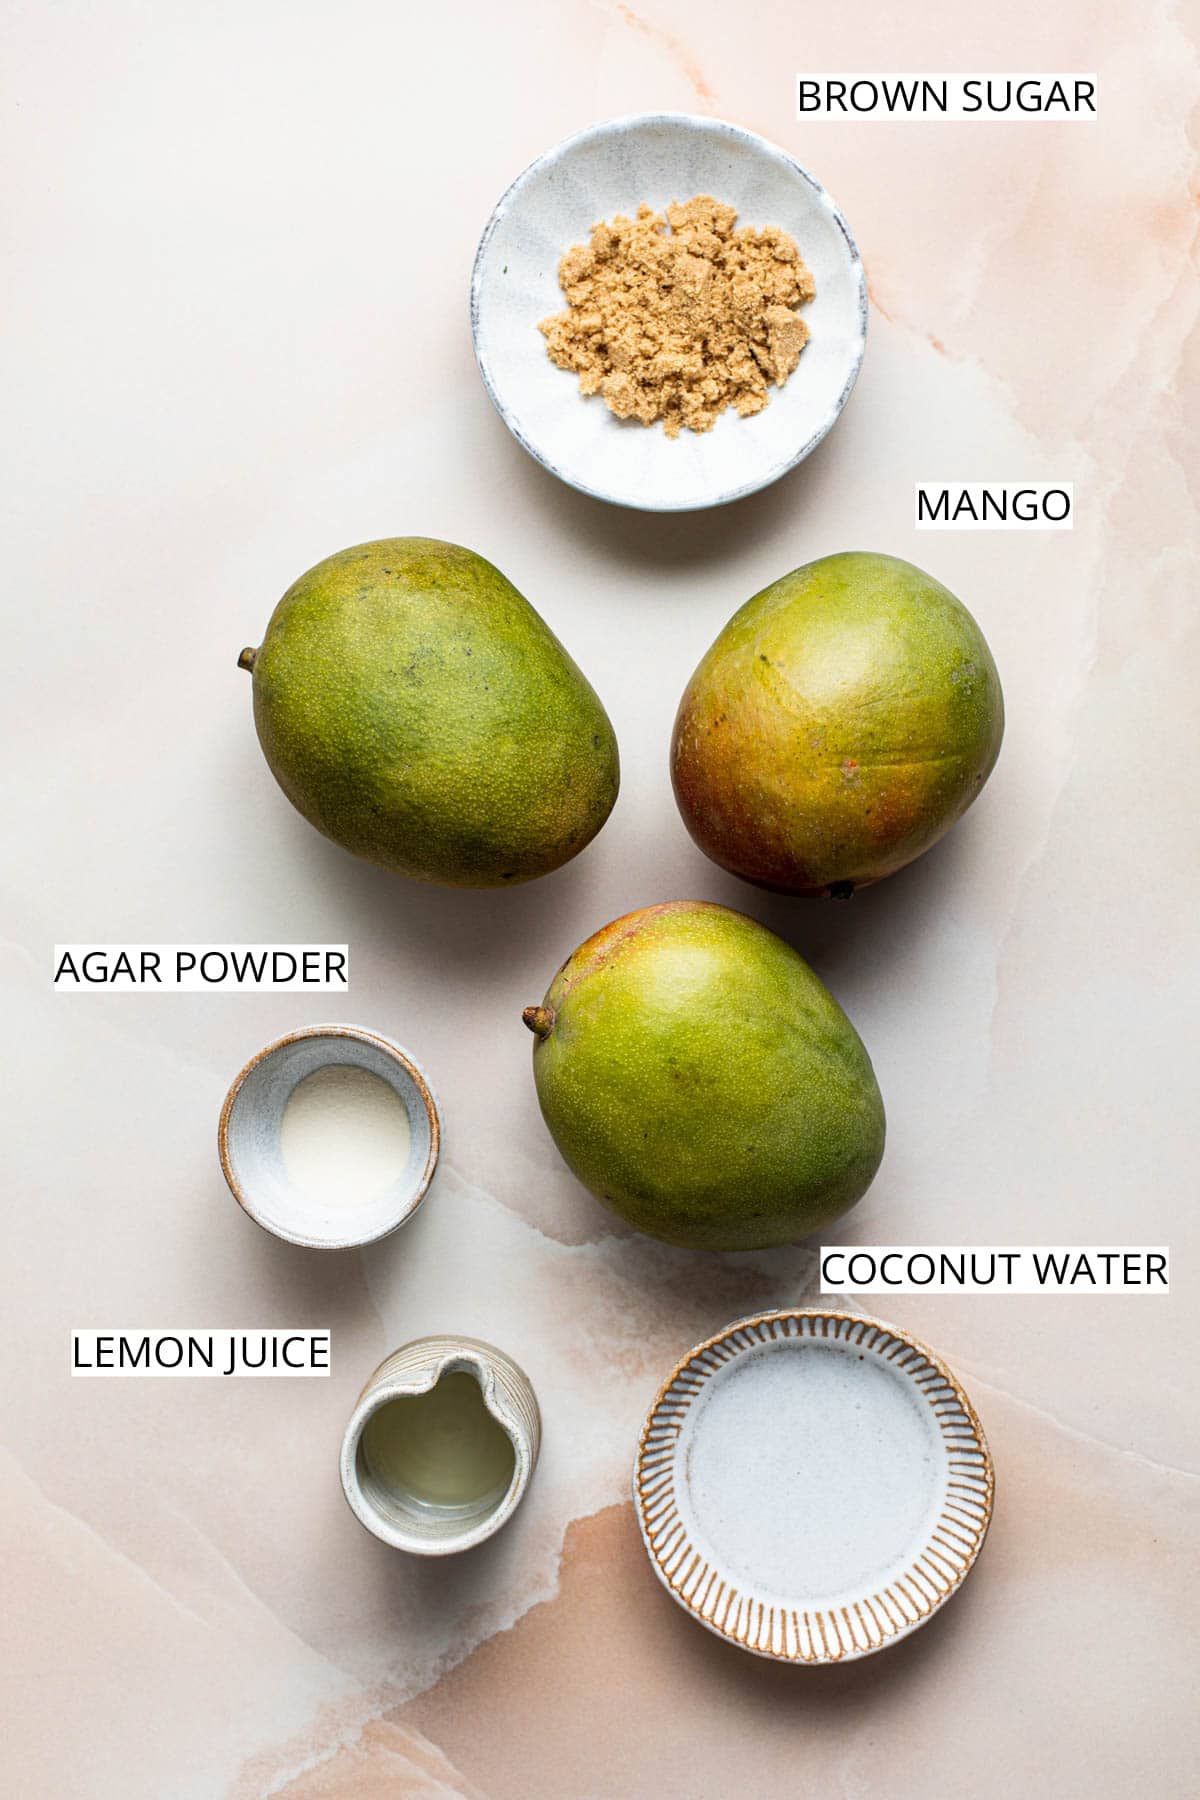 All ingredients needed to make mango jelly.